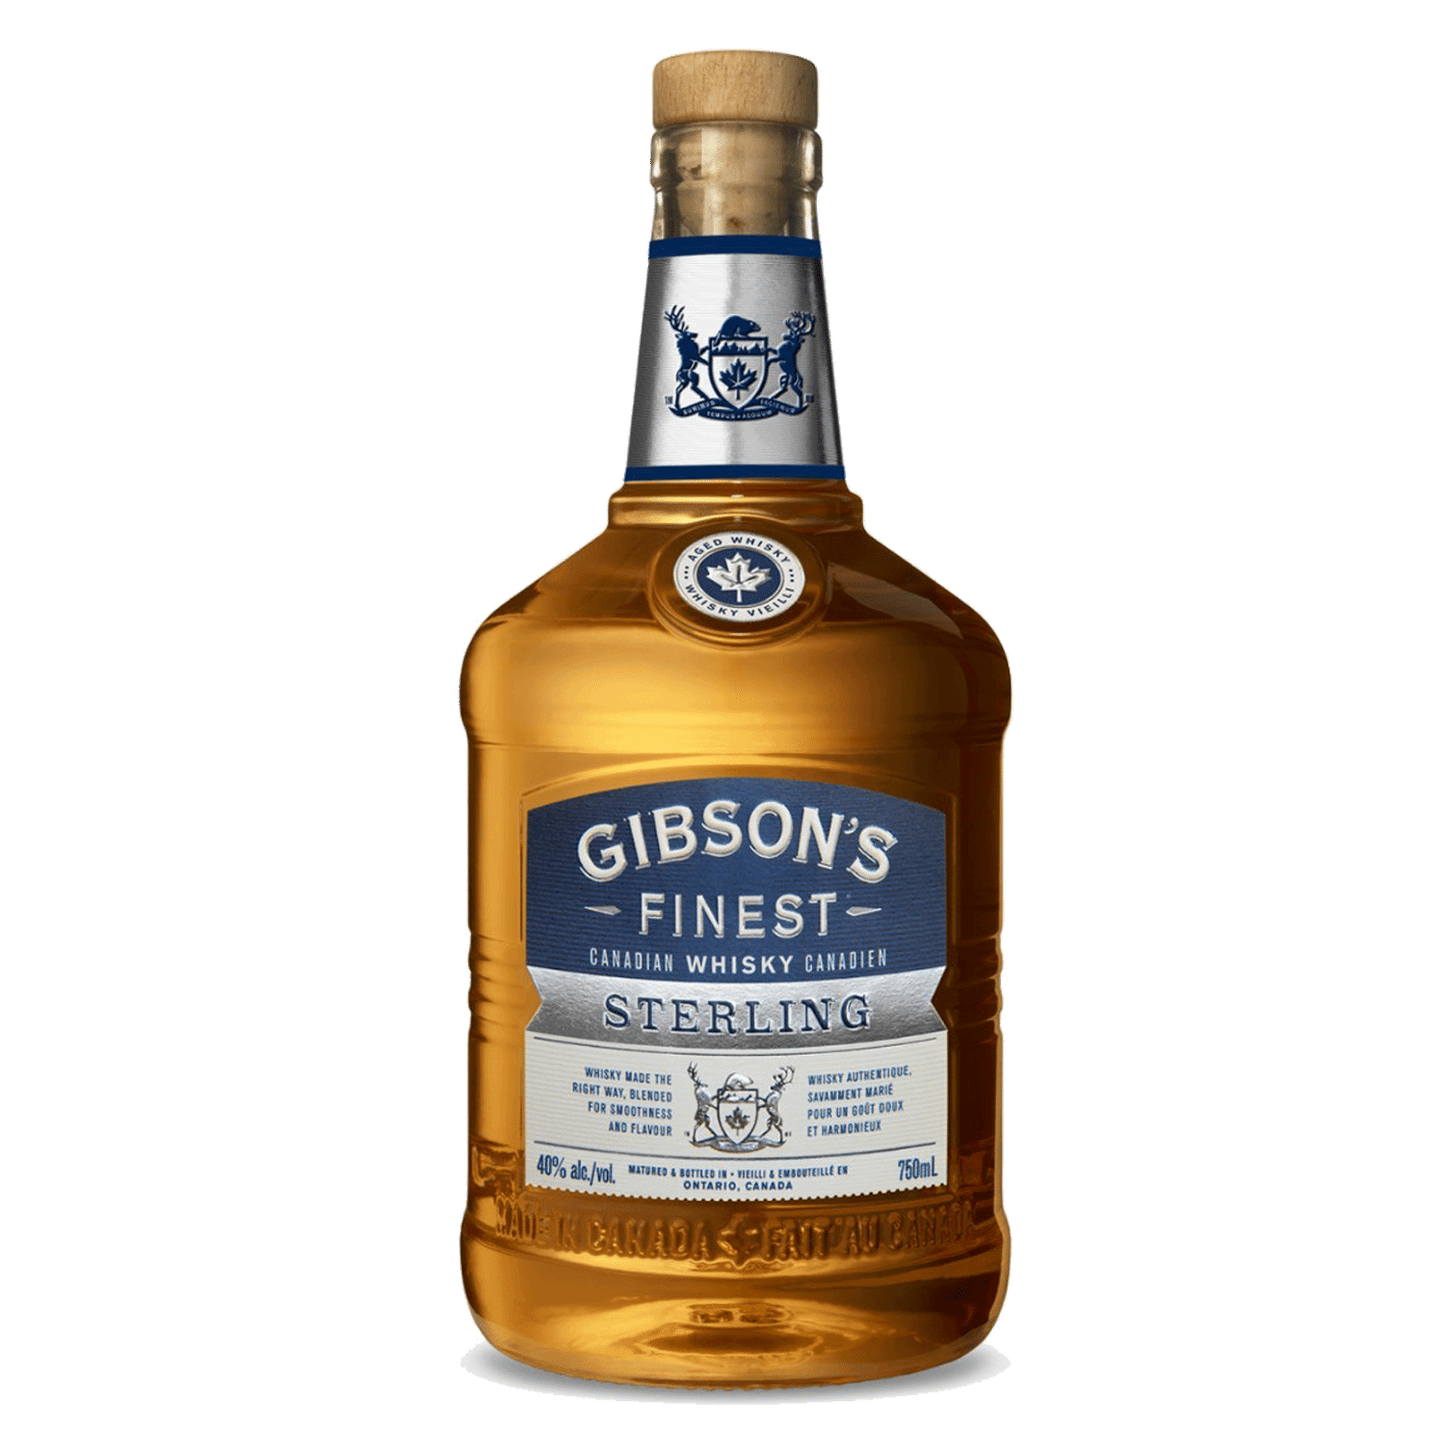 GIBSON'S FINEST STERLING EDITION WHISKEY